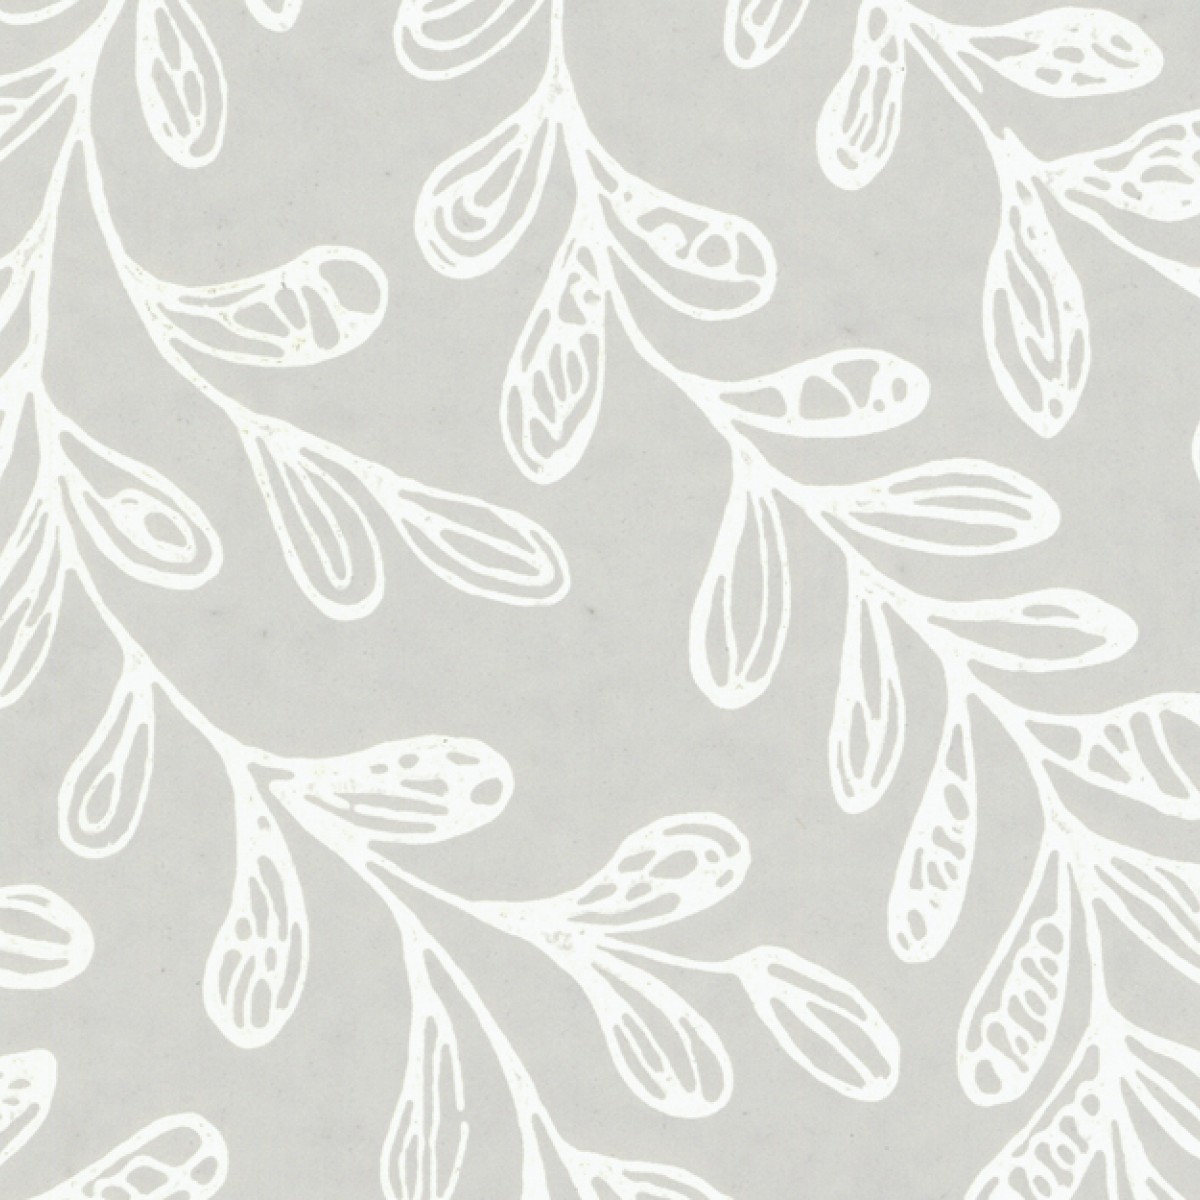 Tapet Audley, Grey Luxury Leaf, 1838 Wallcoverings, 5.3mp / rola, Tapet living 